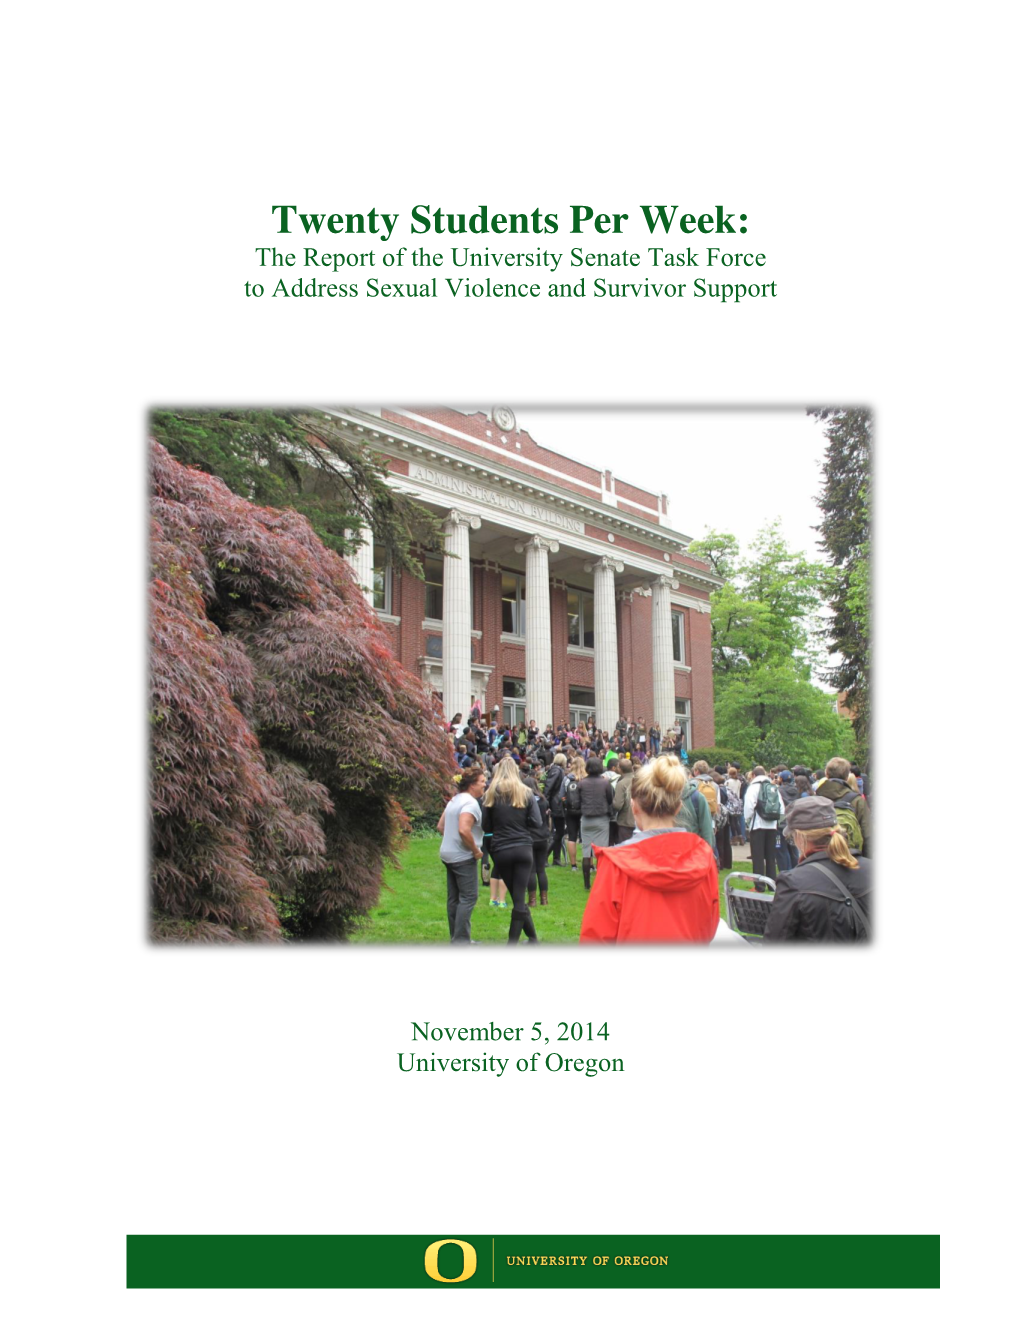 Twenty Students Per Week: the Report of the University Senate Task Force to Address Sexual Violence and Survivor Support